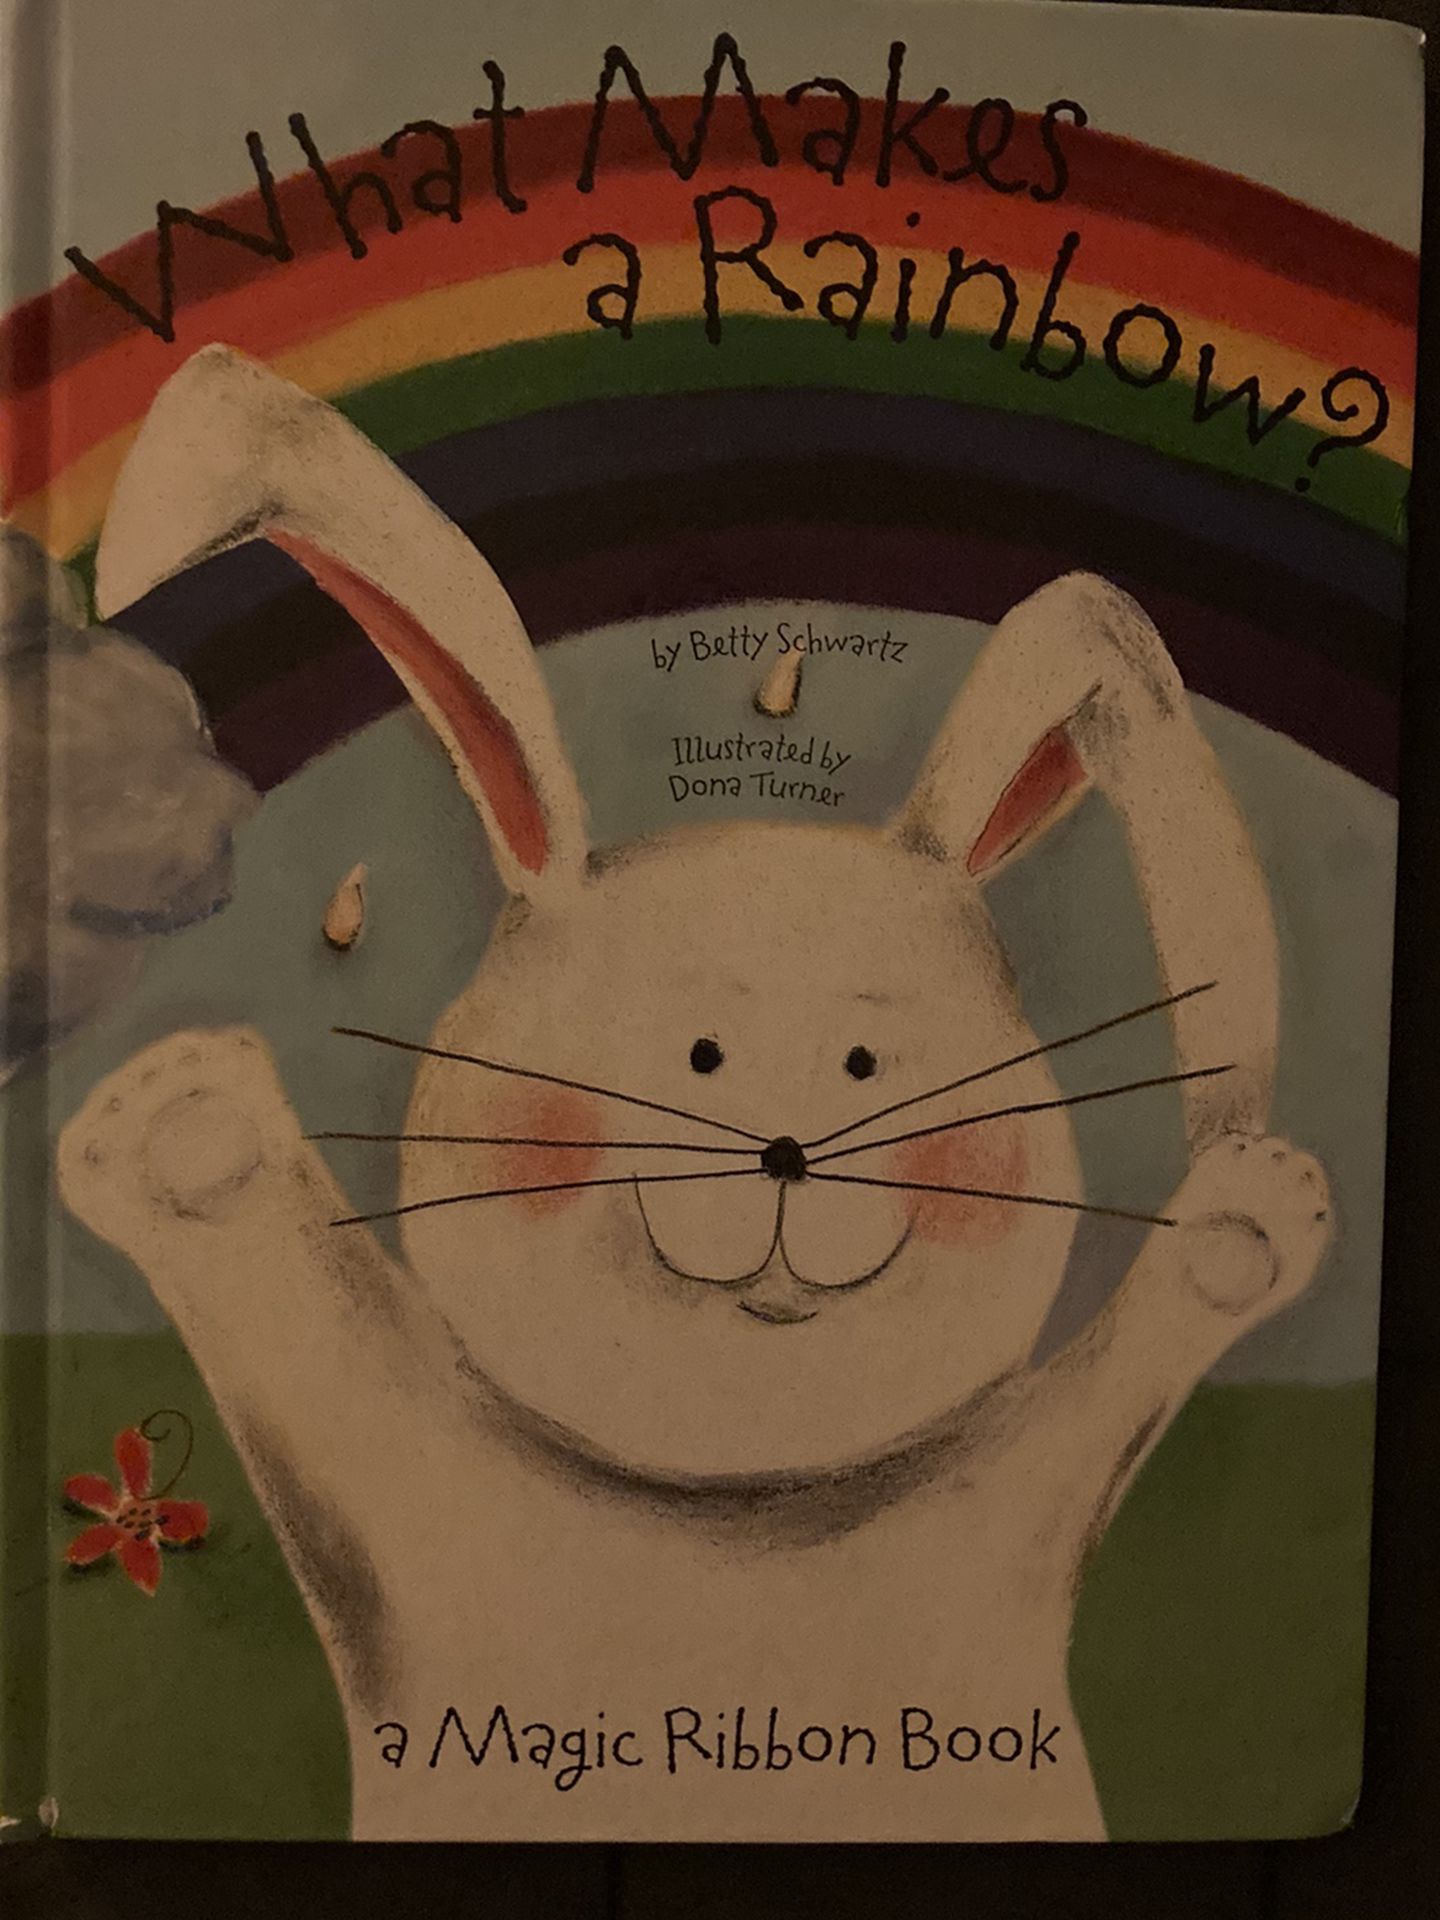 What Makes A Rainbow Book